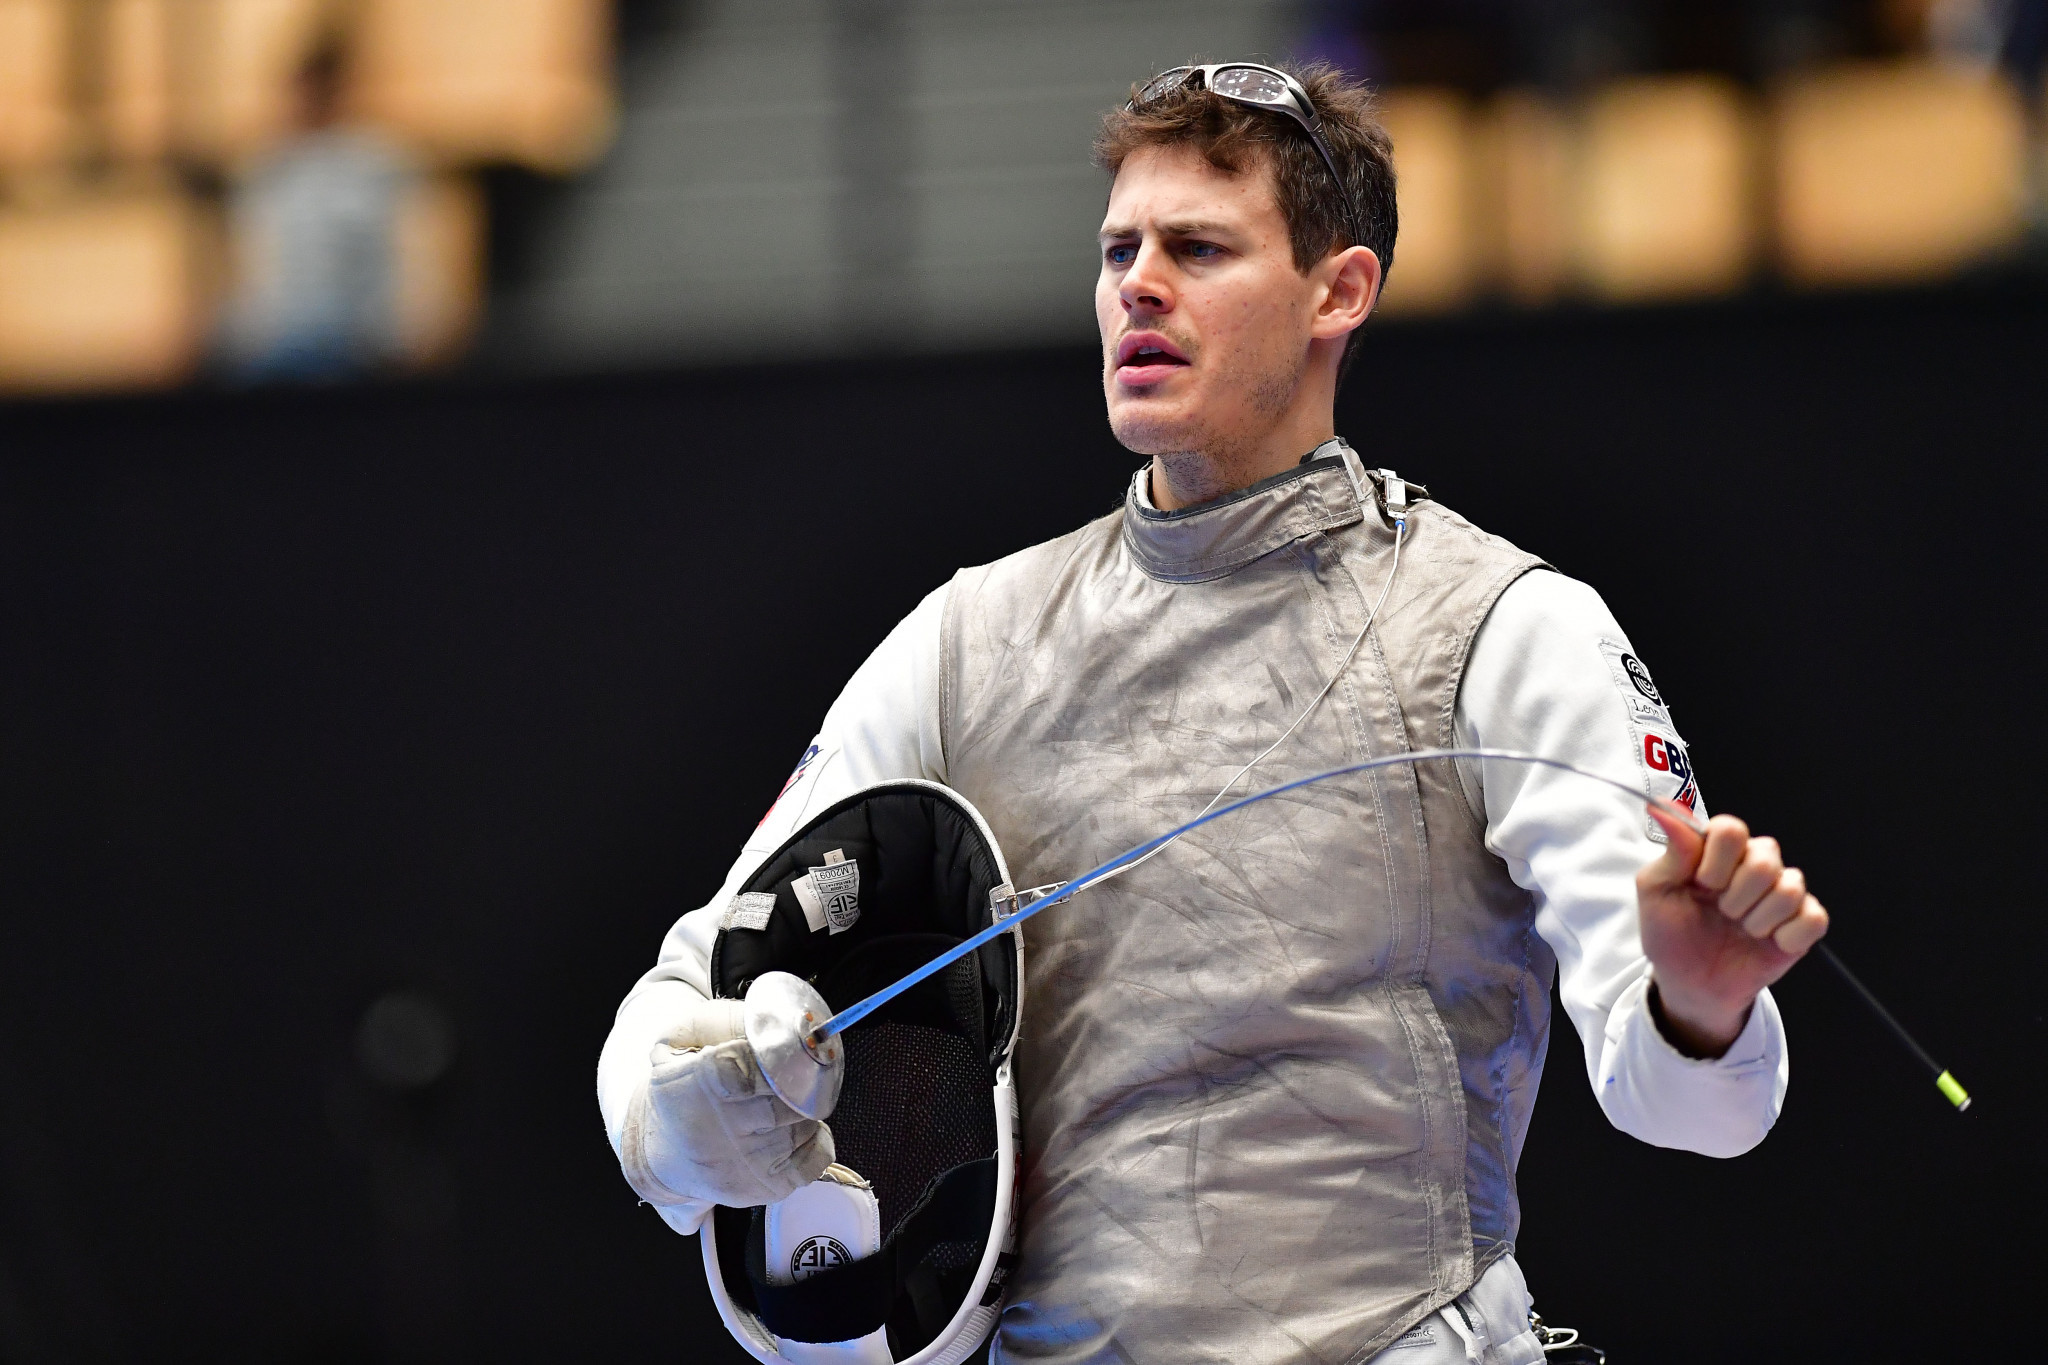 Richard Kruse has become the new world number one by winning the Men's Foil World Cup in Tokyo ©Getty Images